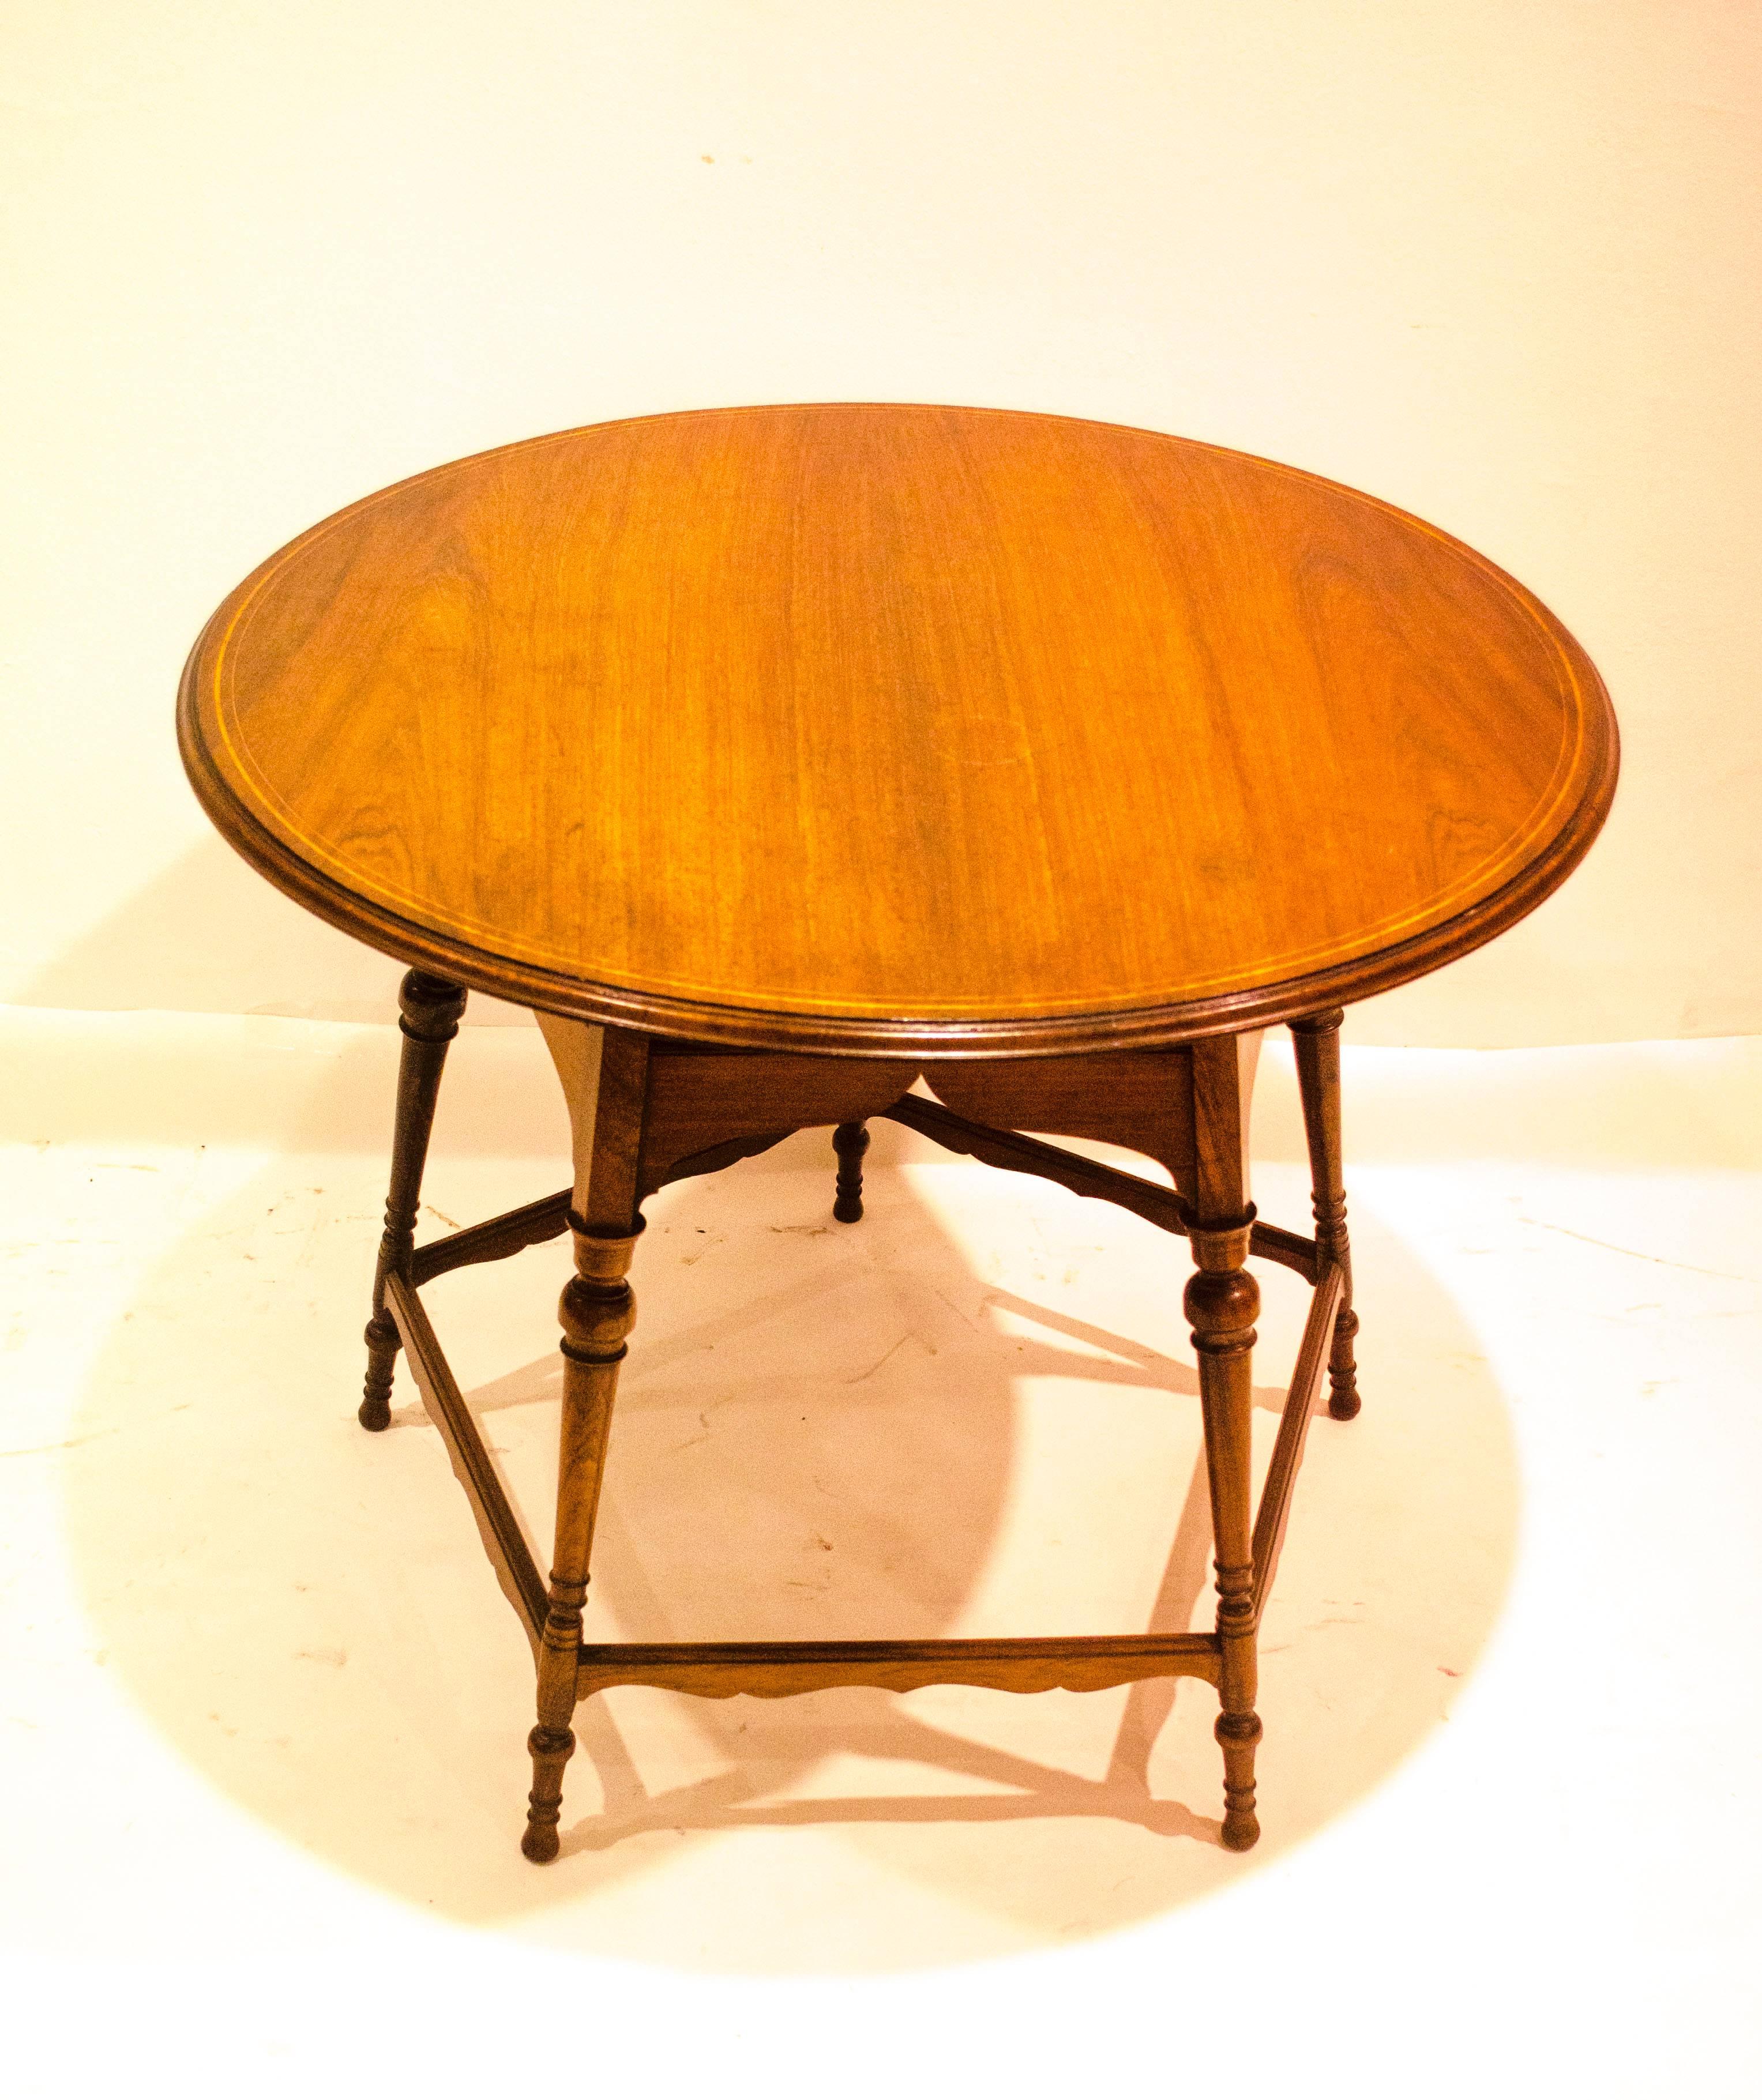 Collinson & Lock. In the style of E W Godwin. 
Two Aesthetic Movement Rosewood and line inlaid circular tables, with Japanese style shaped undertiers below, on five turned and tapered legs each table with subtle differences to the turnings, joined